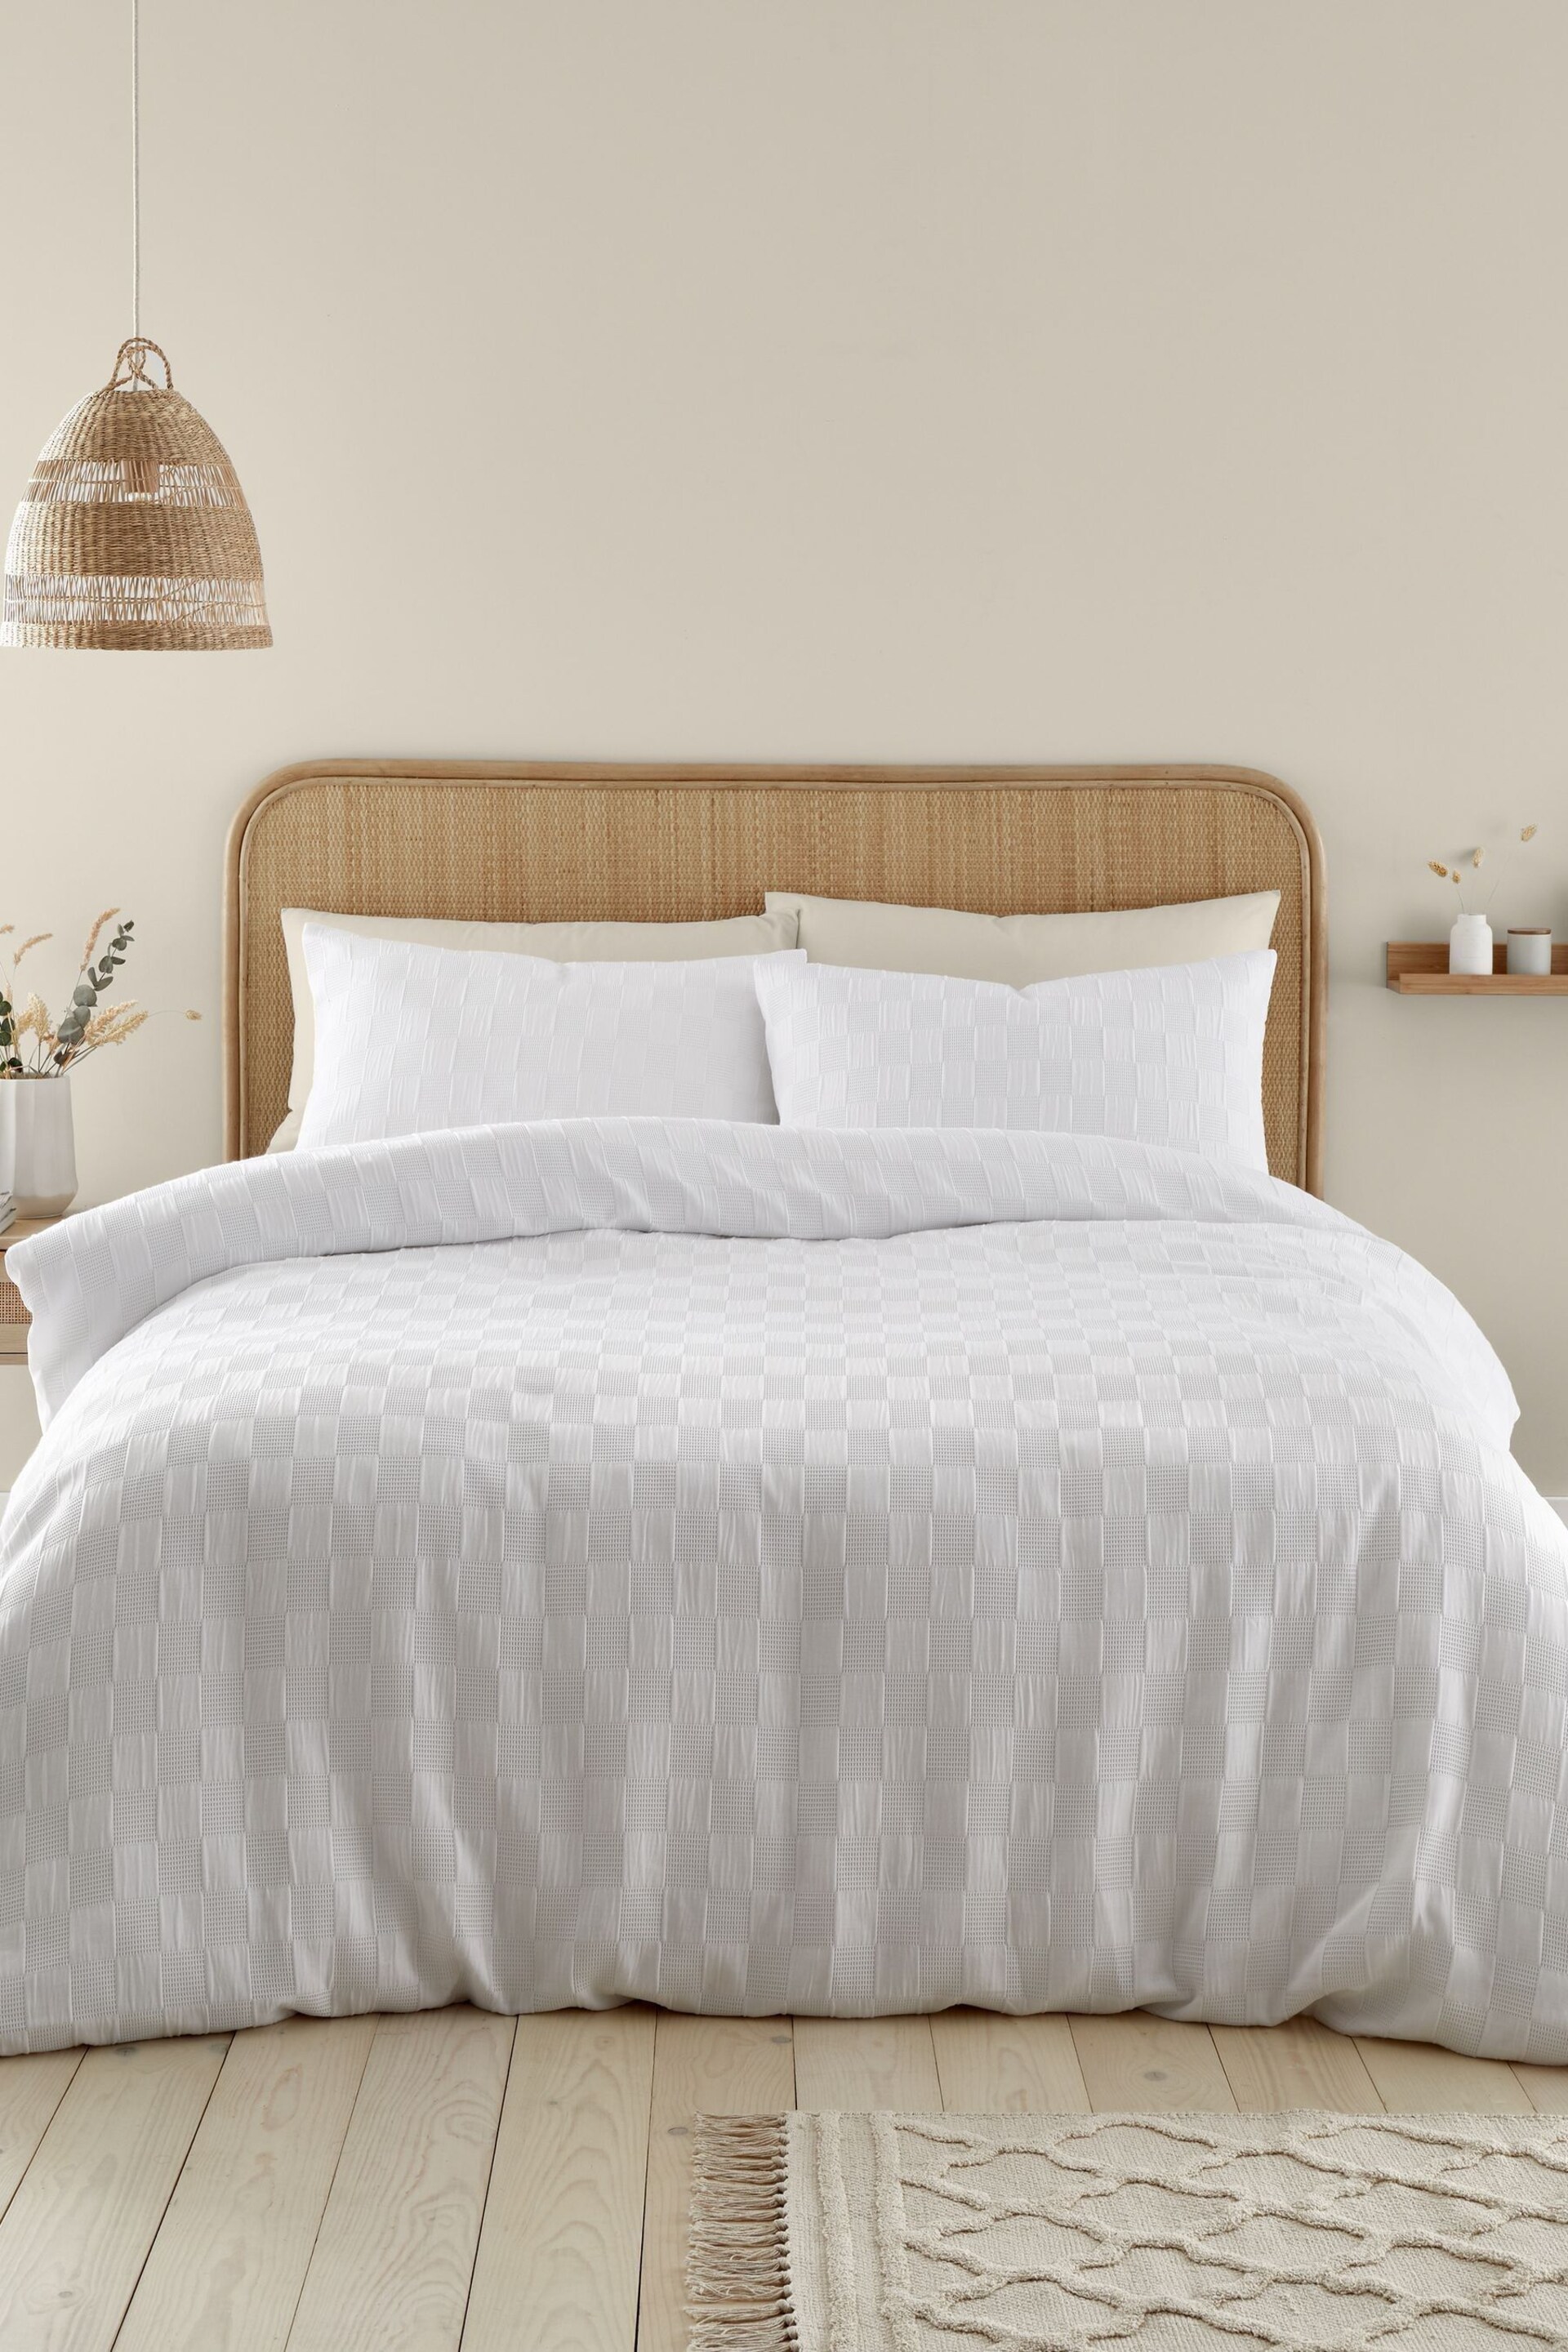 Catherine Lansfield White Waffle Checkerboard Duvet Cover Set - Image 2 of 5